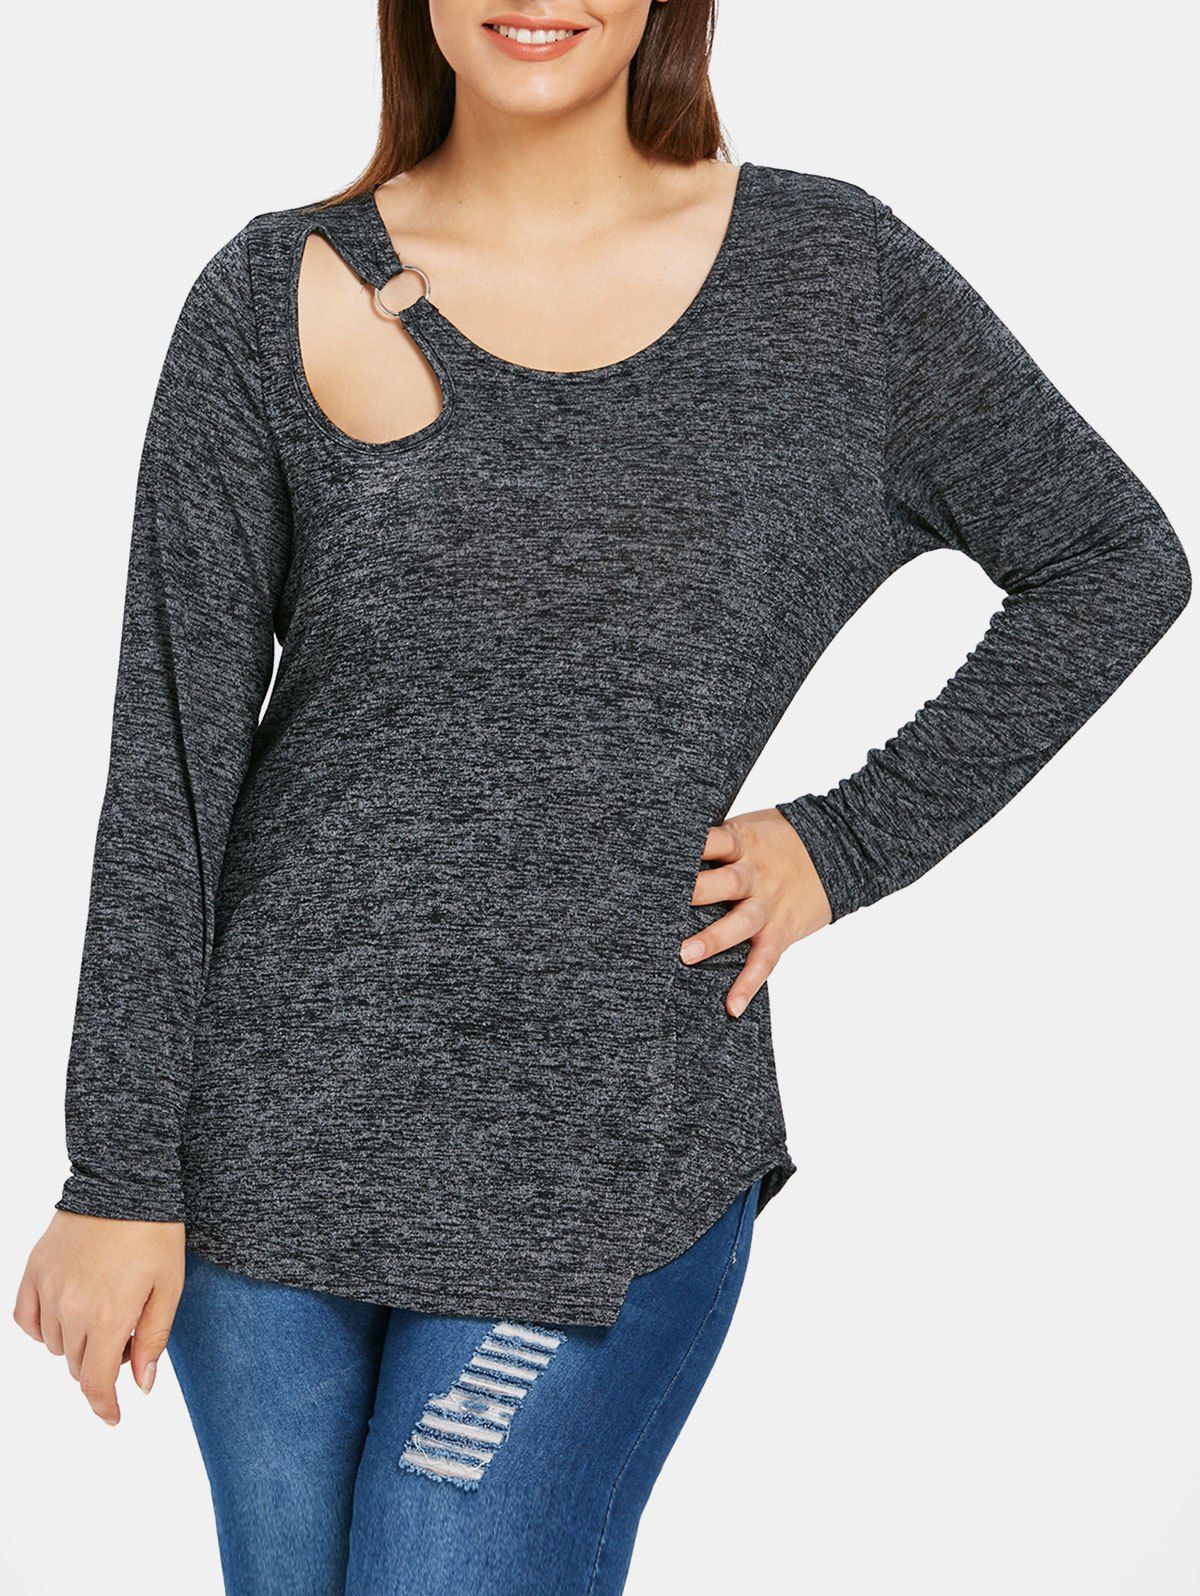 [34% OFF] 2020 Plus Size Long Sleeve Cut Out Marled T-shirt In DARK SLATE GREY | DressLily